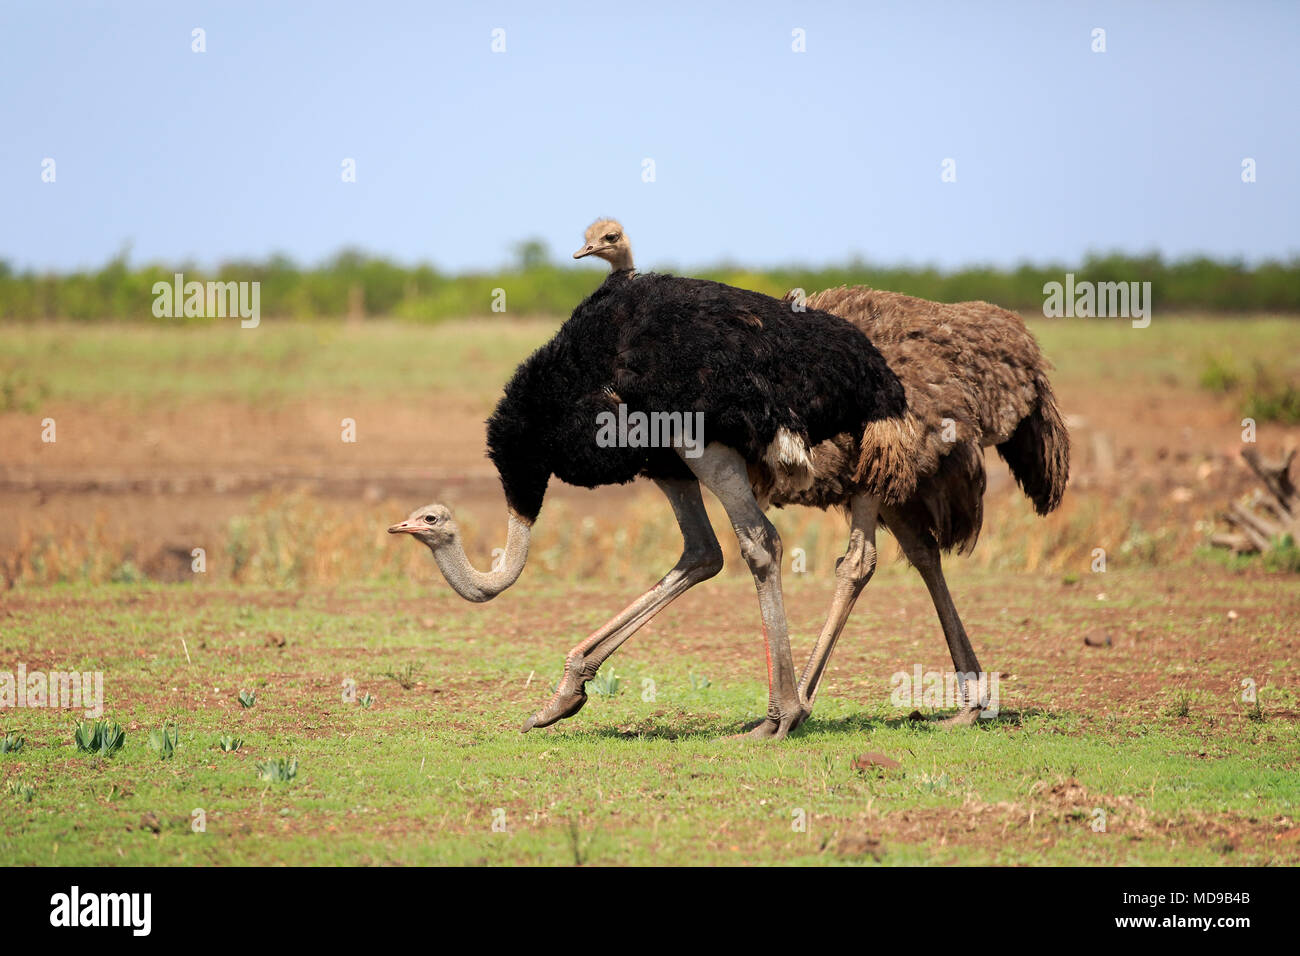 Funny South African ostriches (Struthio camelus australis), adult, animal pair, running, Kruger National Park, South Africa Stock Photo